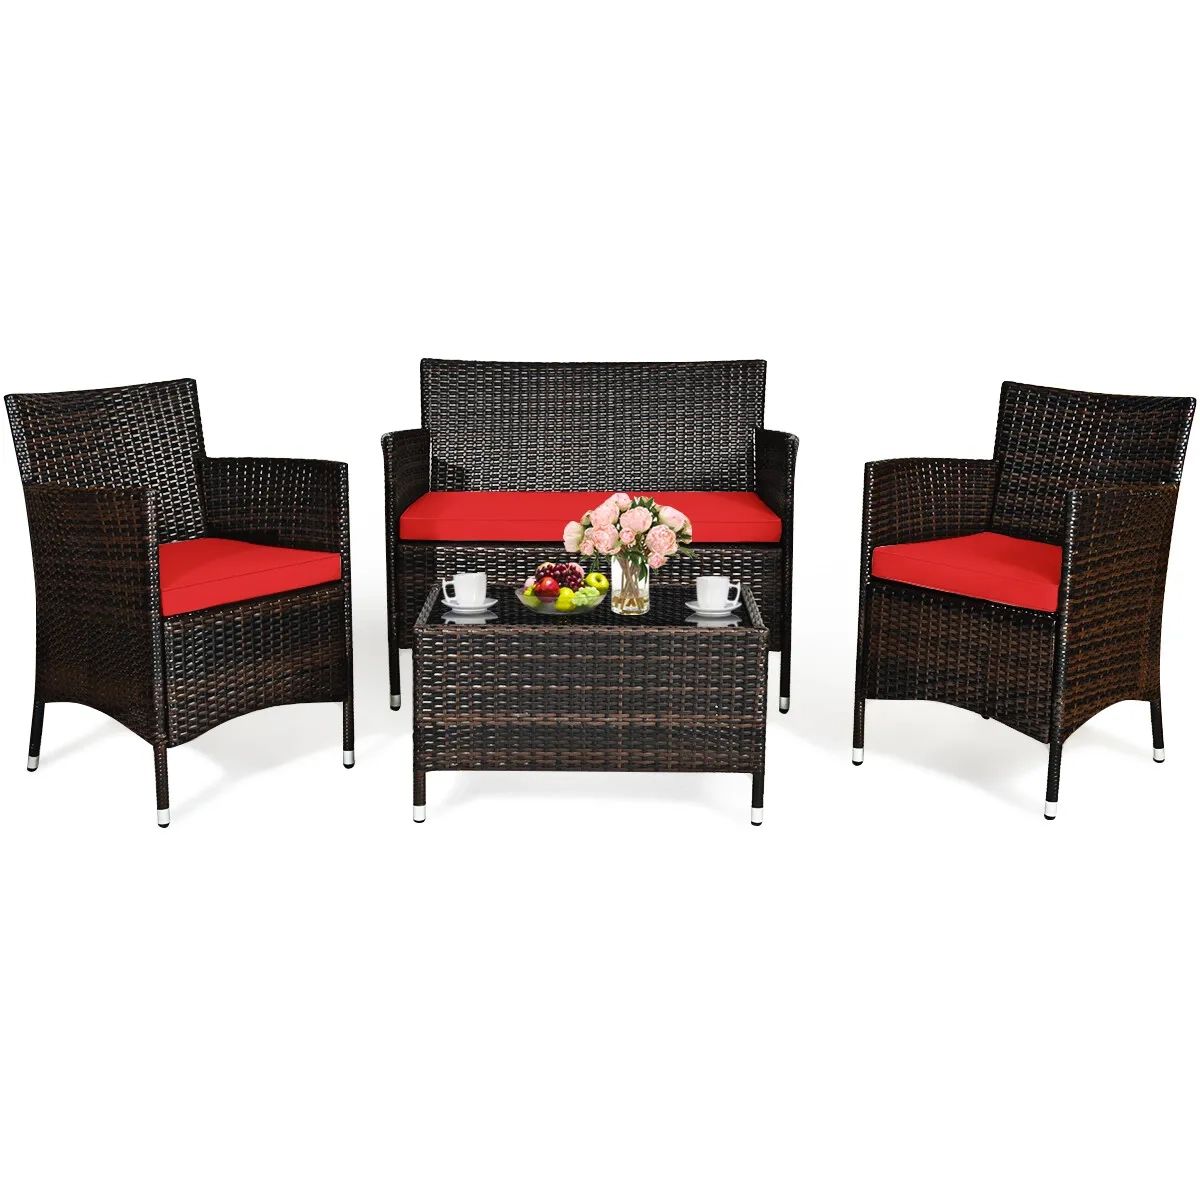 4pcs Rattan Patio Furniture Set Cushioned Sofa Chair Coffee Table Red | Ebay In 4pcs Rattan Patio Coffee Tables (View 7 of 15)